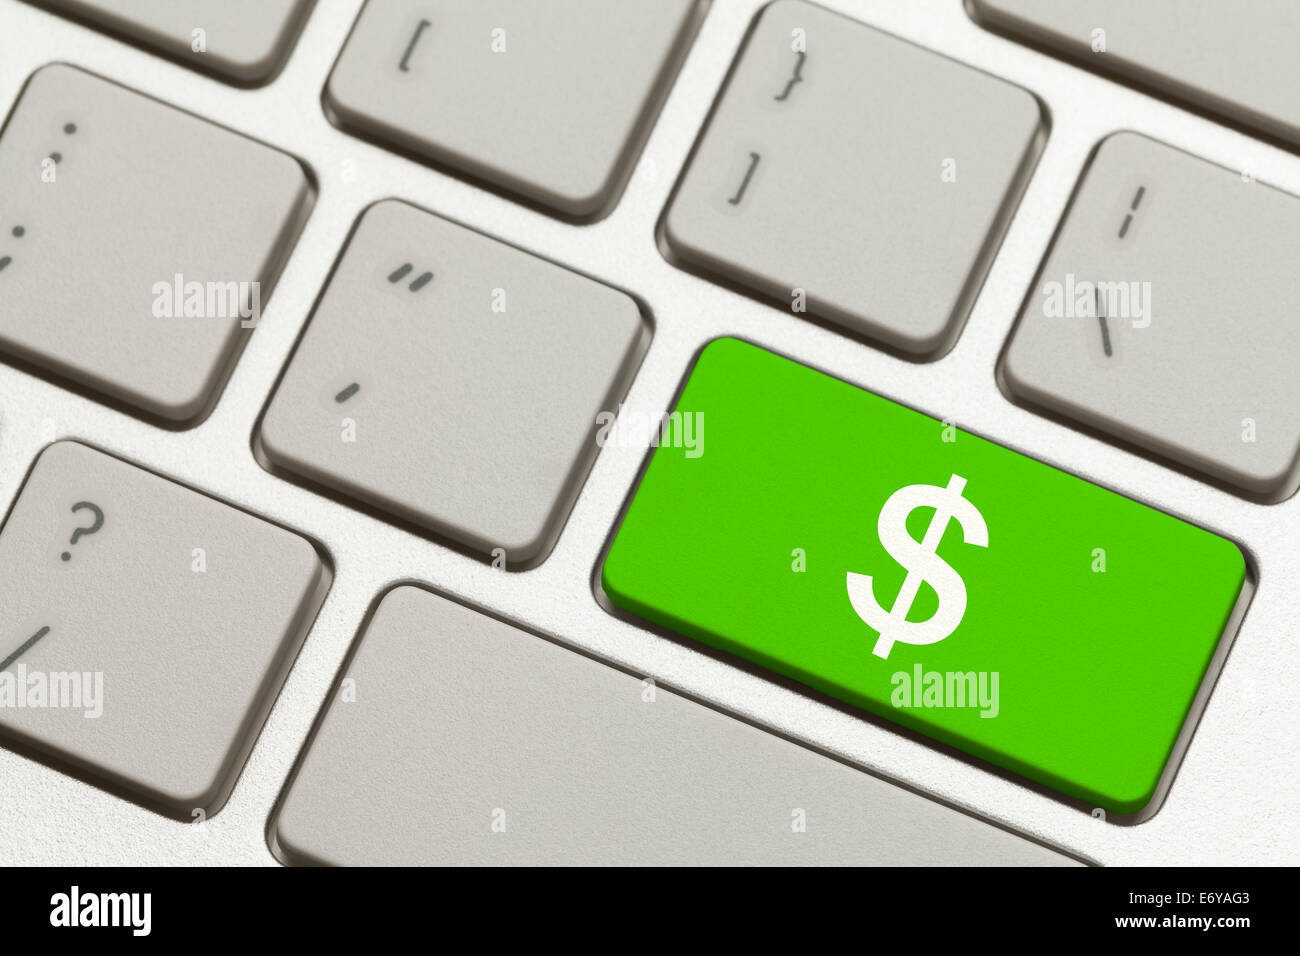 Close Up of Green Money Key with Cash Symbol on a Keyboard. Stock Photo